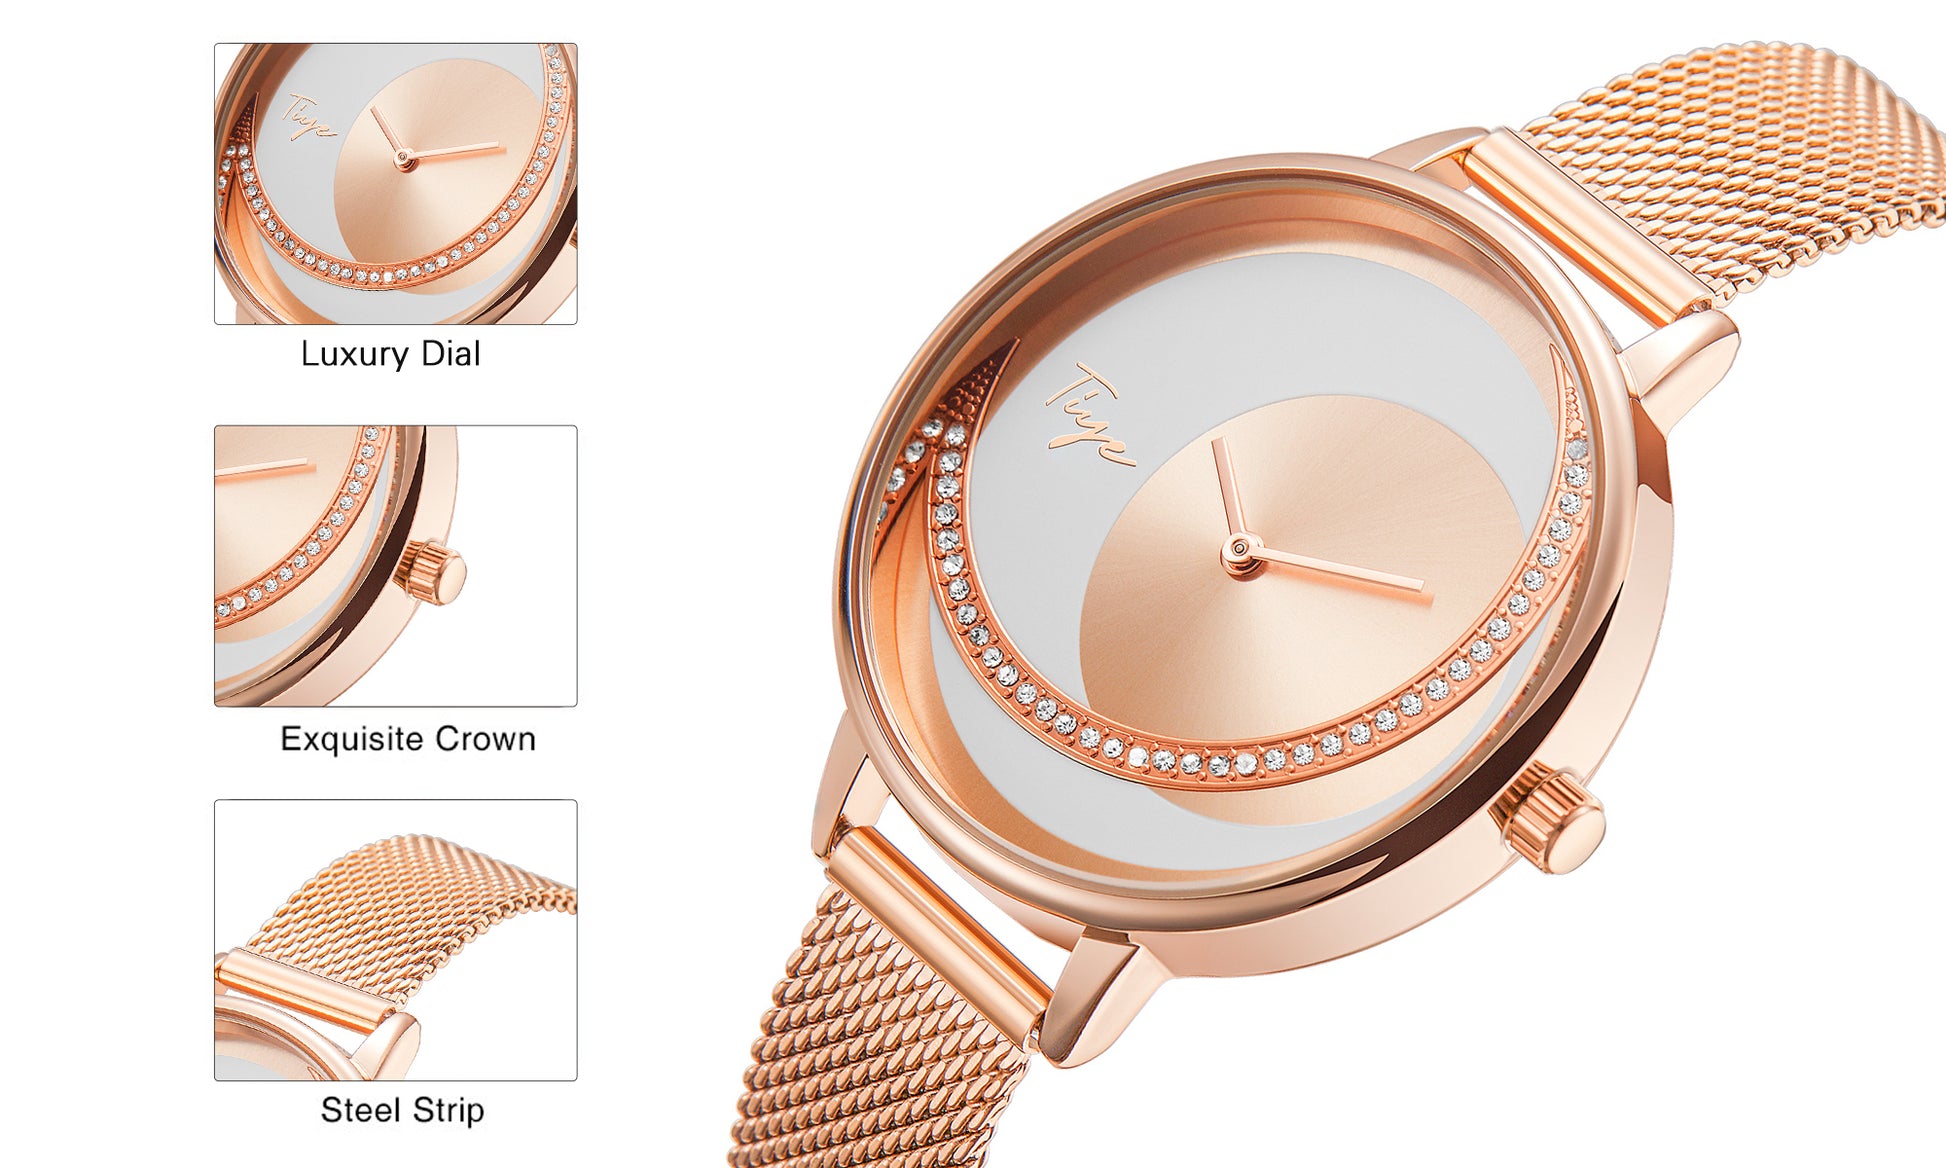 Diamond Shine
925 Sterling Silver
Rose Gold
Rhodium Plated
Affordable Jewelry
Affordable Women Watches
Affordable Women Jewelry
Affordable Women Watch Sets